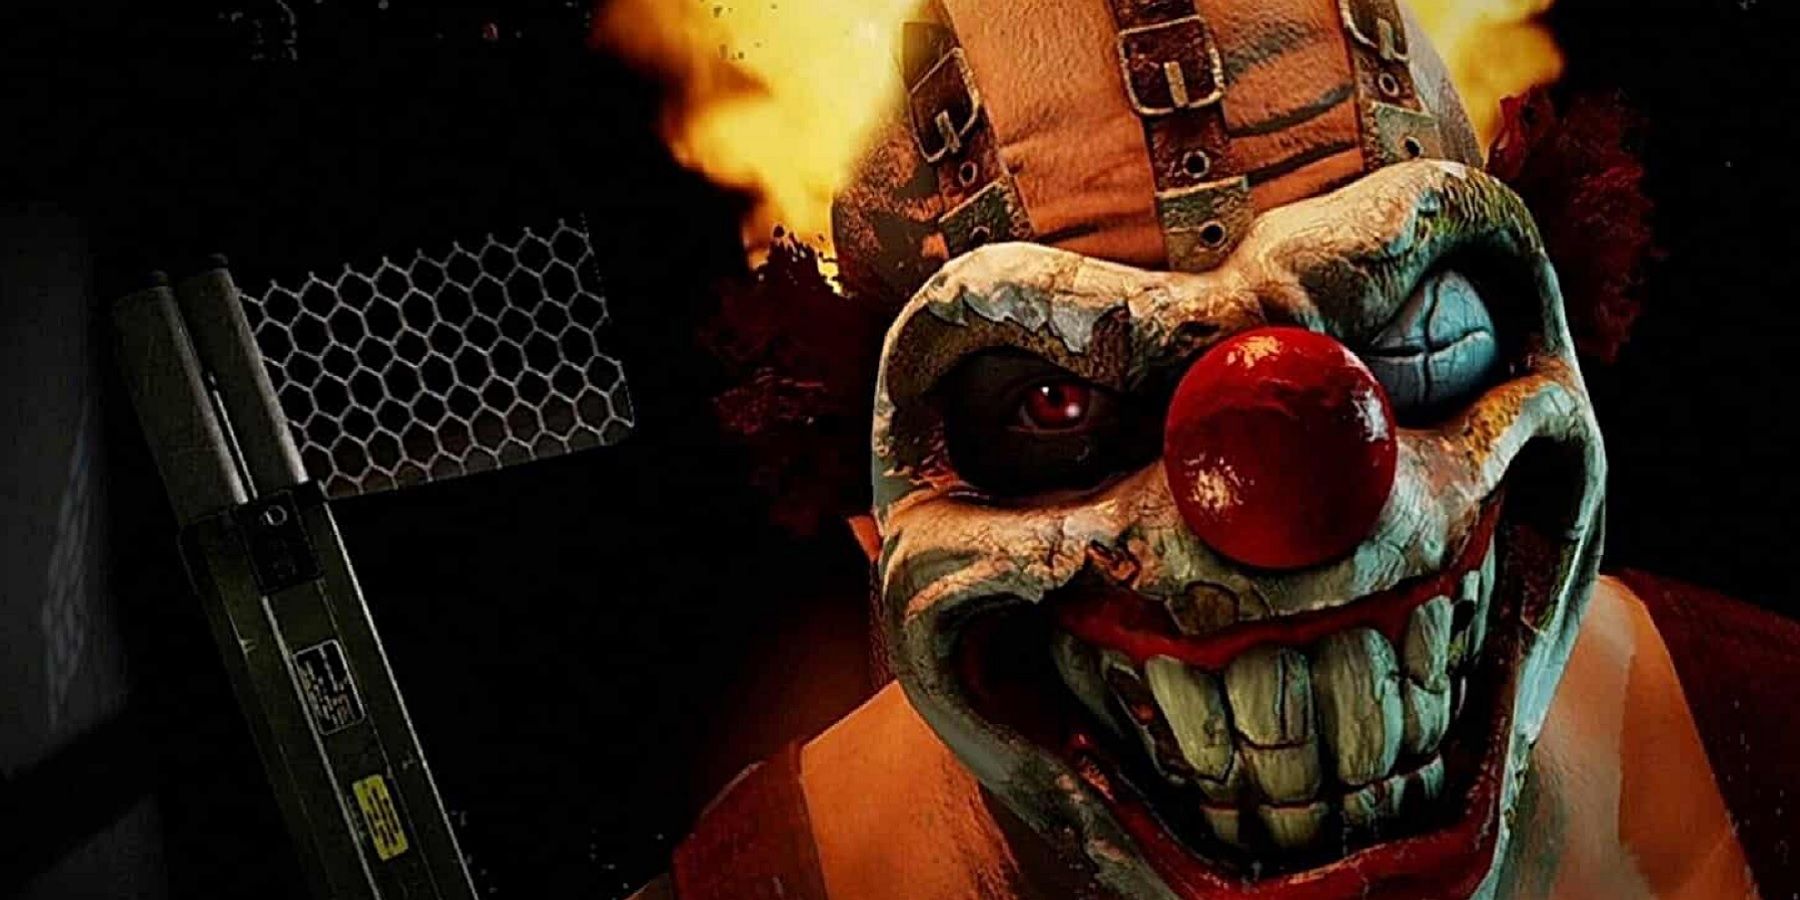 New Twisted Metal game in development, says insider